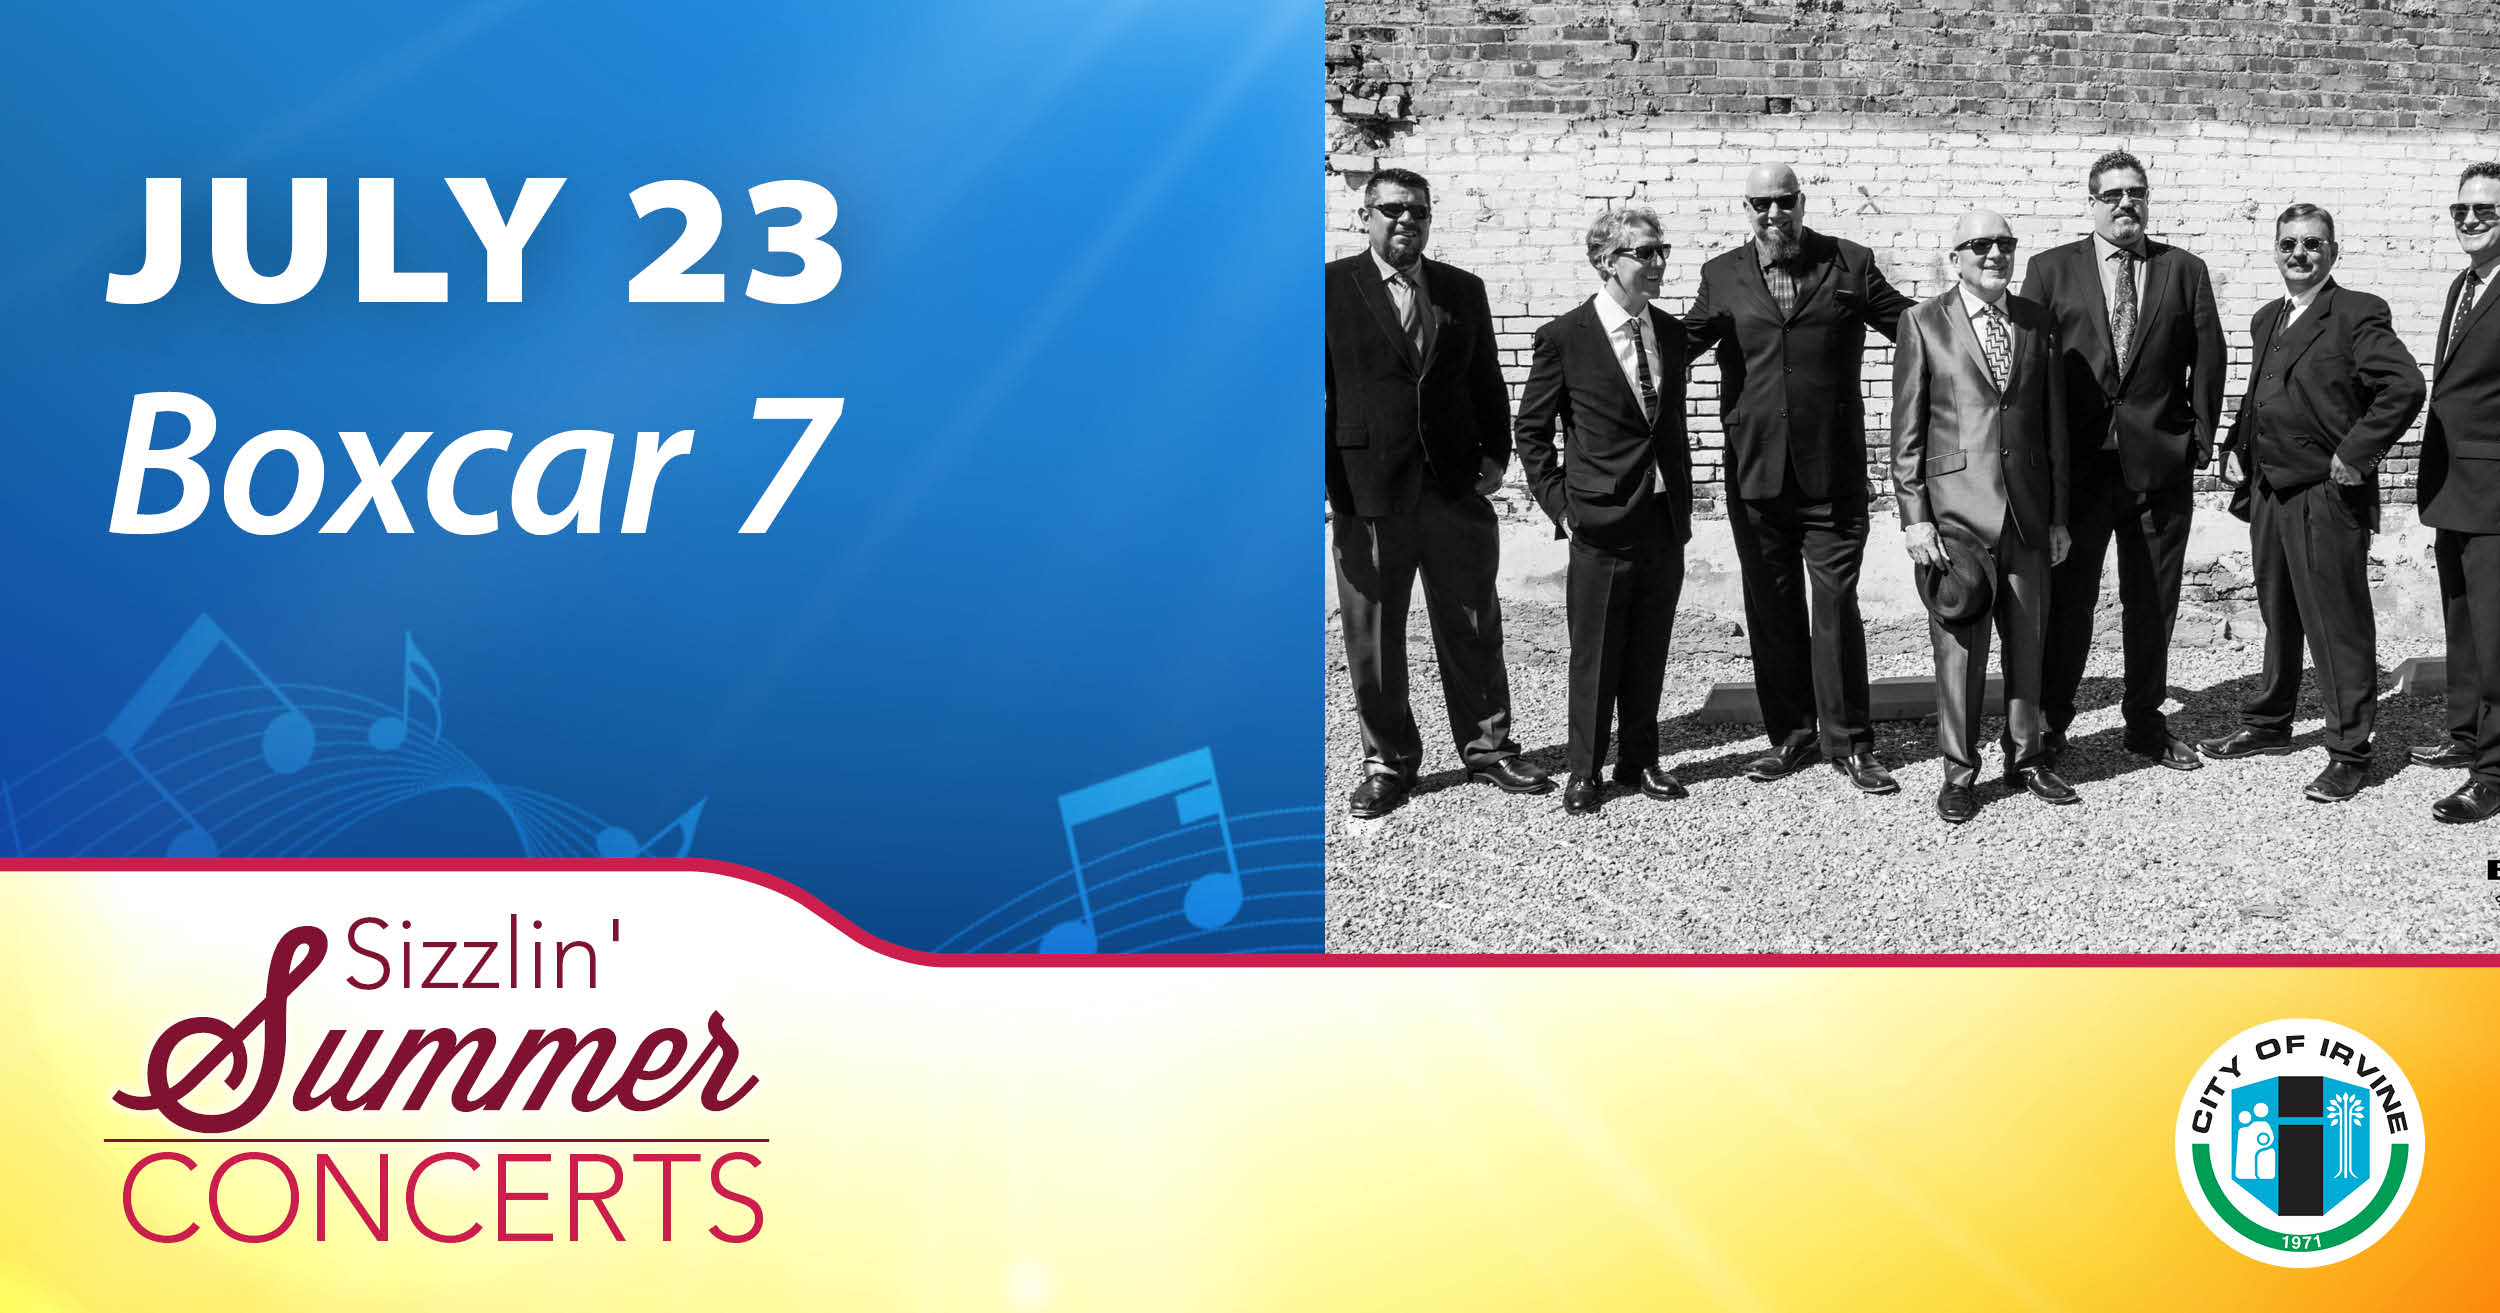 Sizzlin' Summer Concert Boxcar 7 (Blues, Soul, and Classic R&B) City